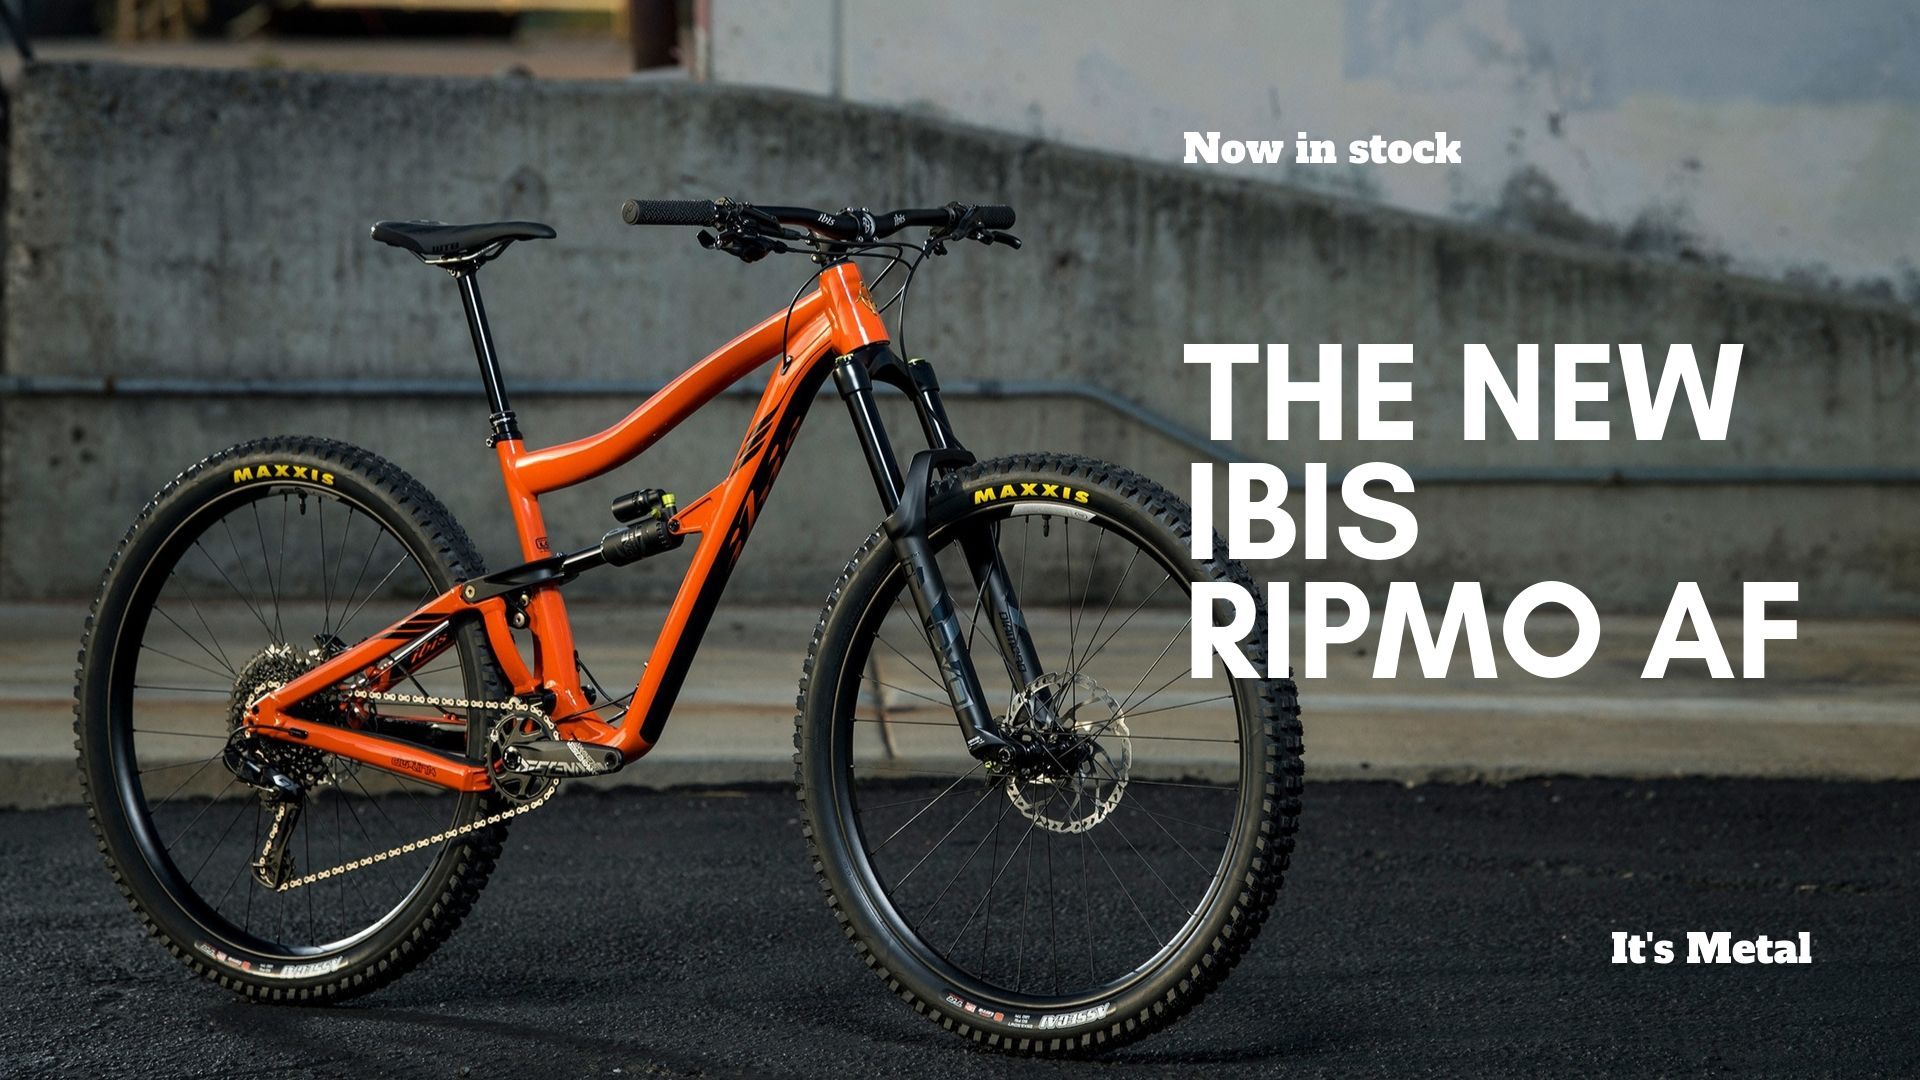 The New Ibis Ripmo AF